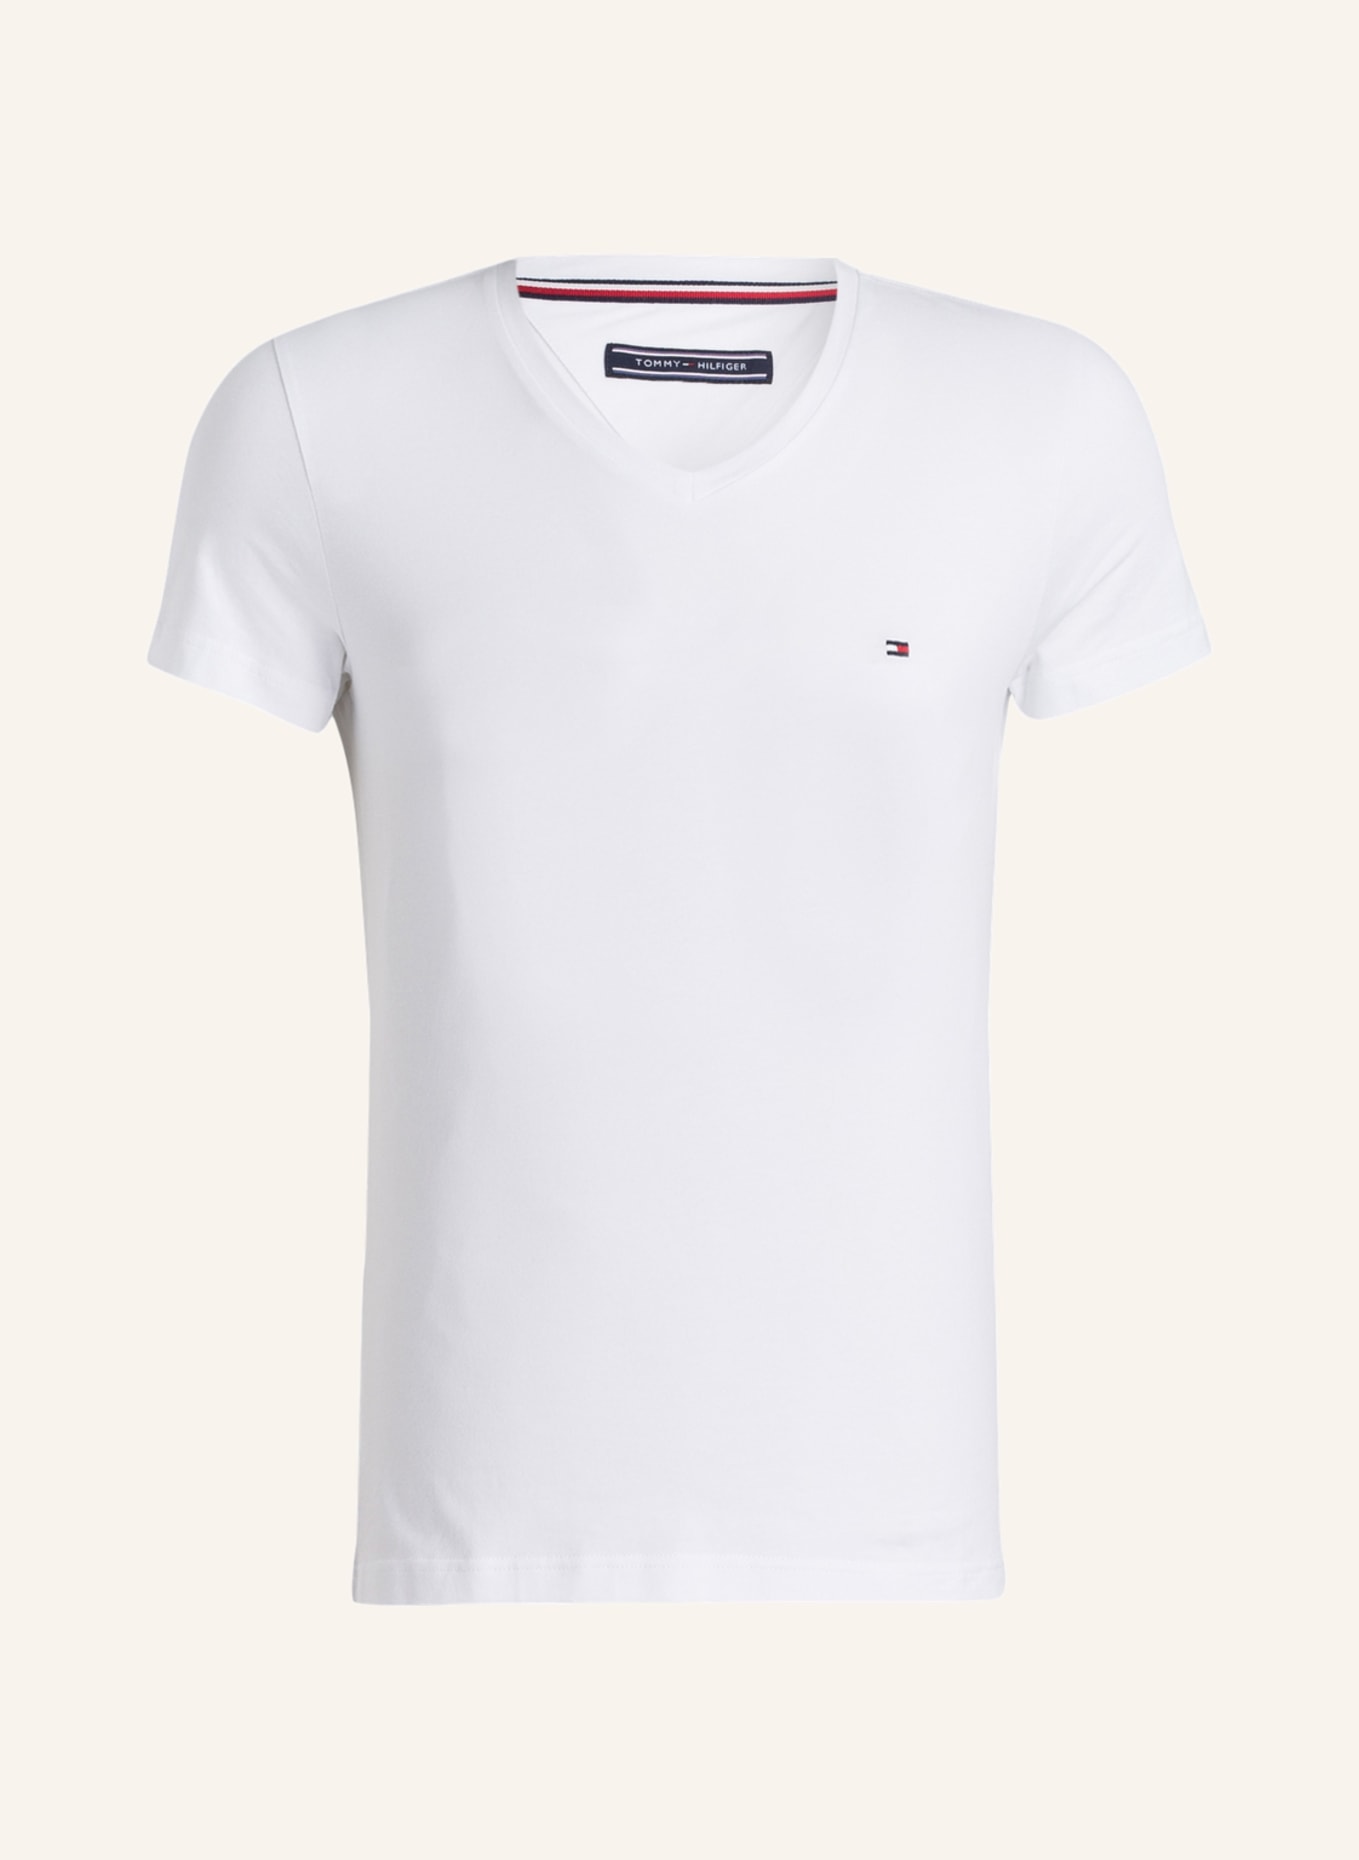 TOMMY HILFIGER in |